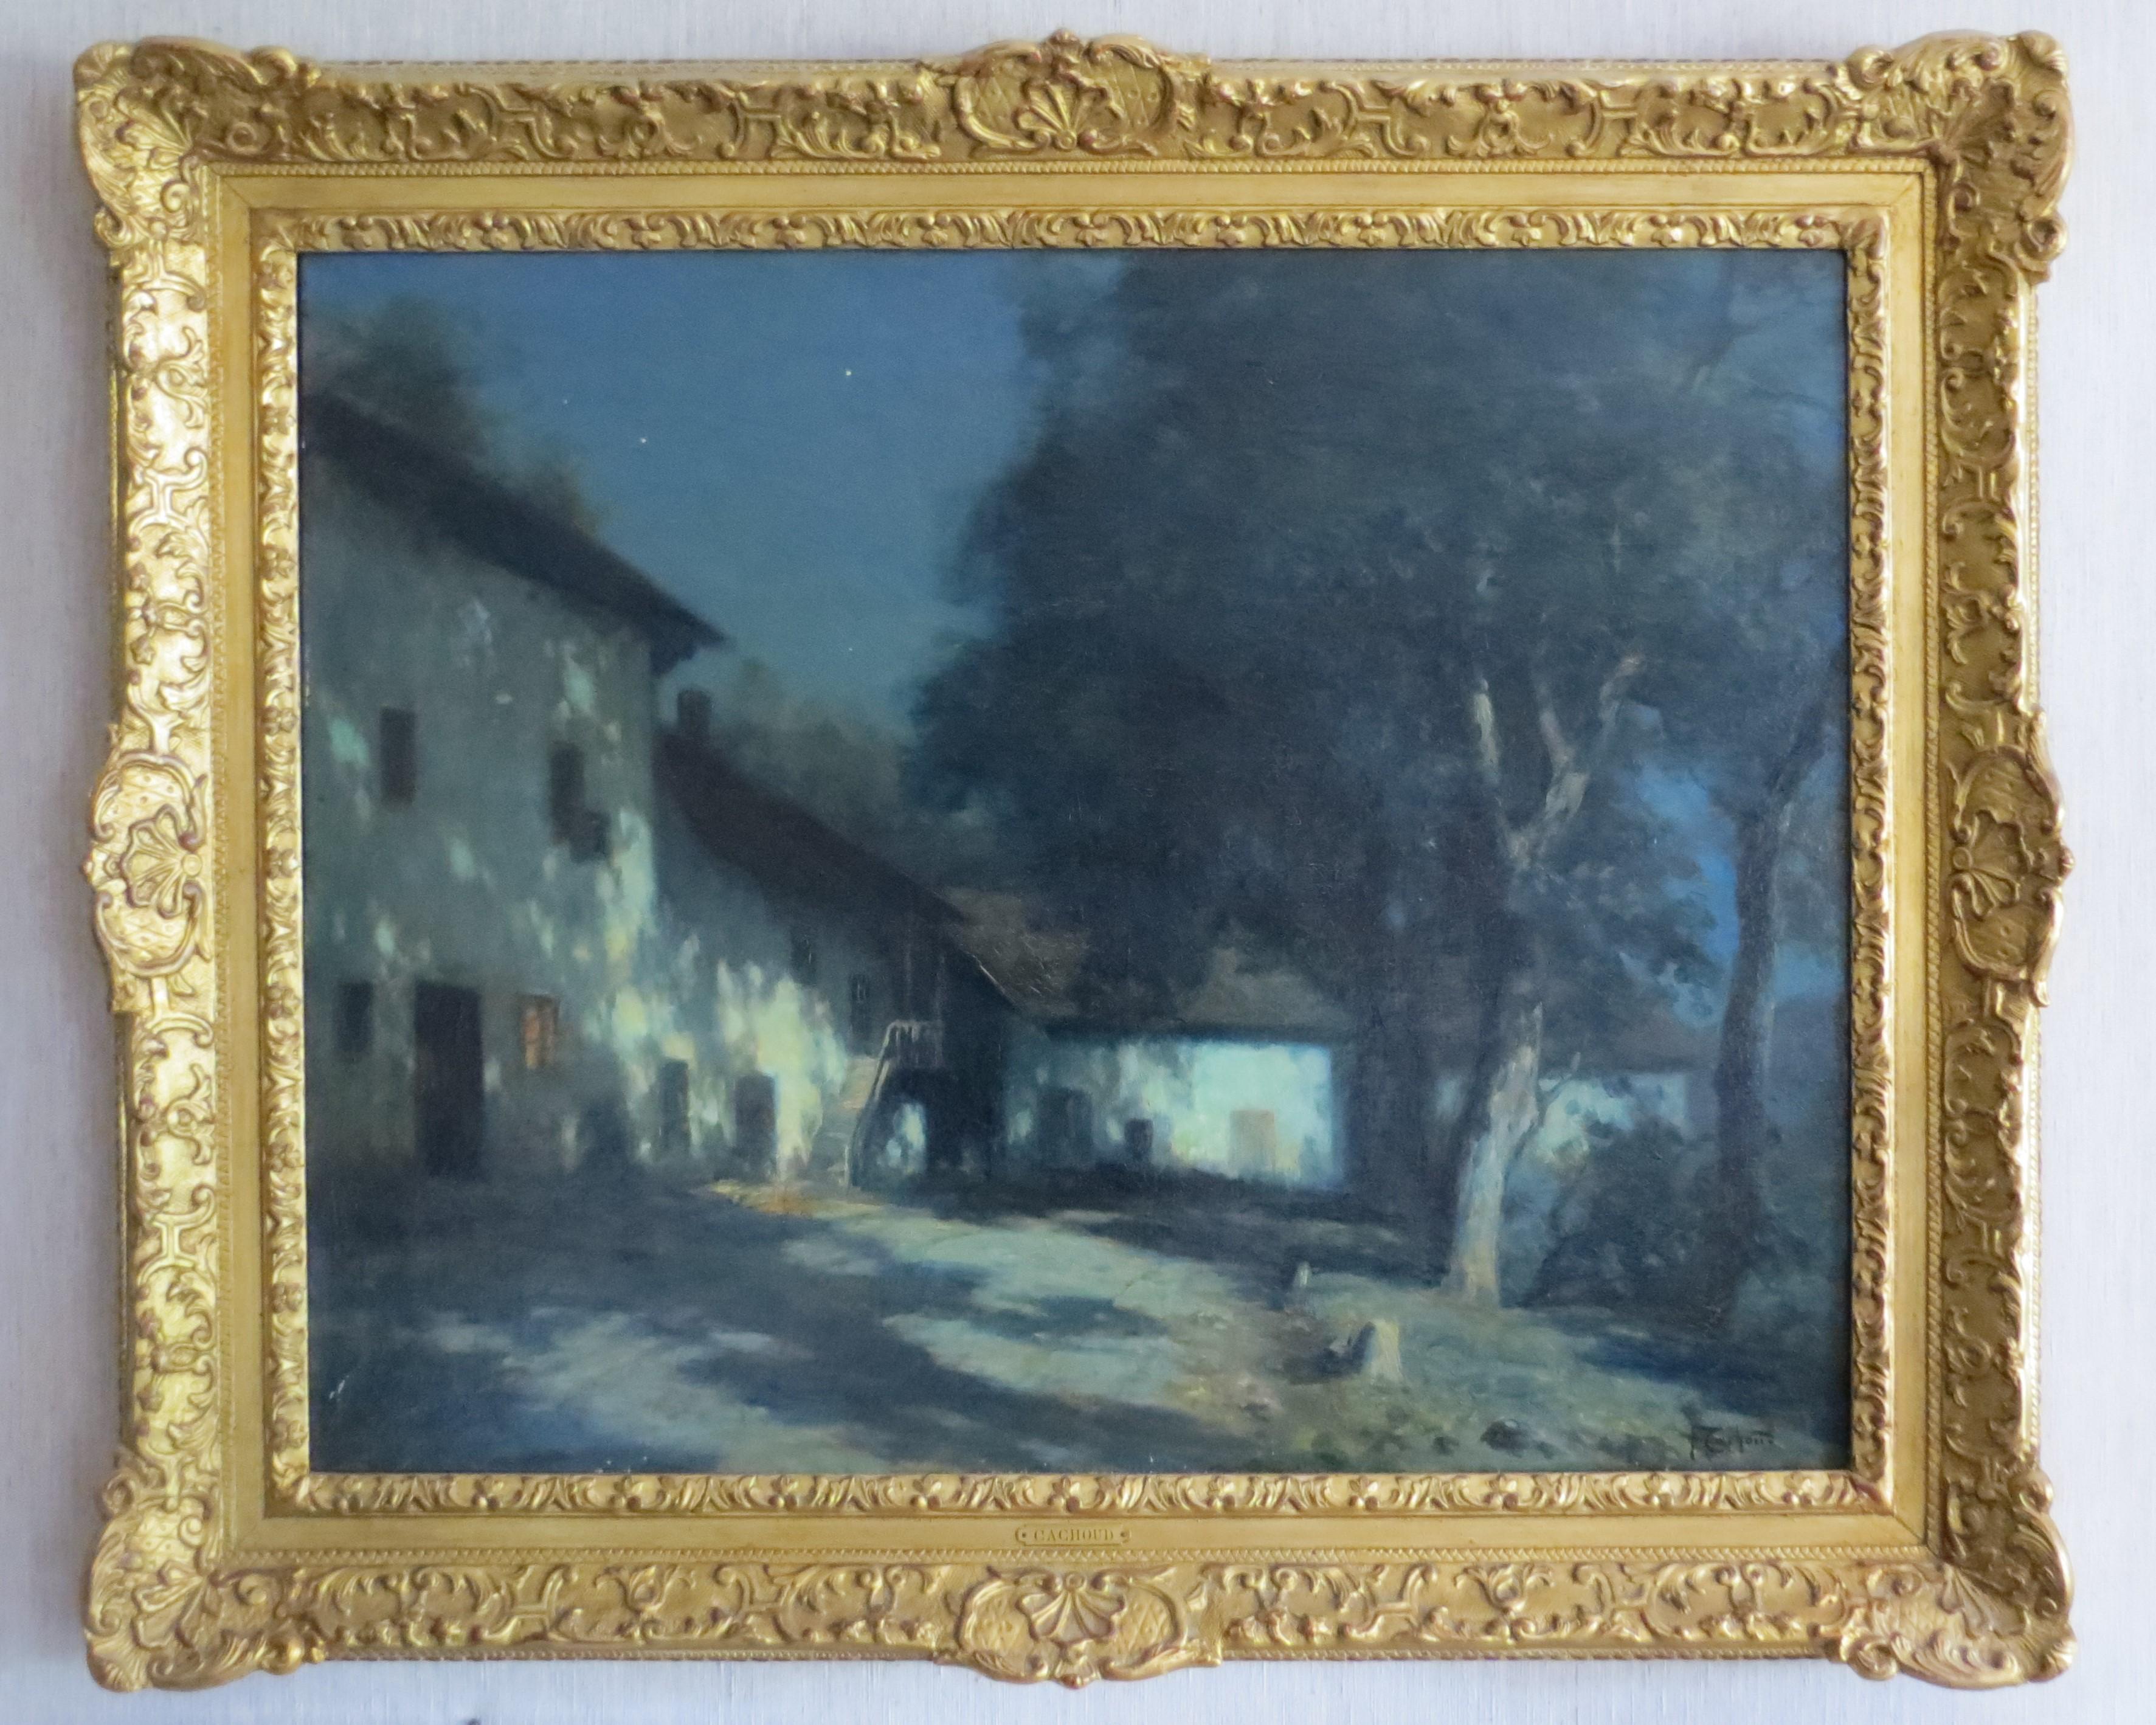 Francois Charles CACHOUD Landscape Painting - Moonlight in Savoie France signed Cachoud